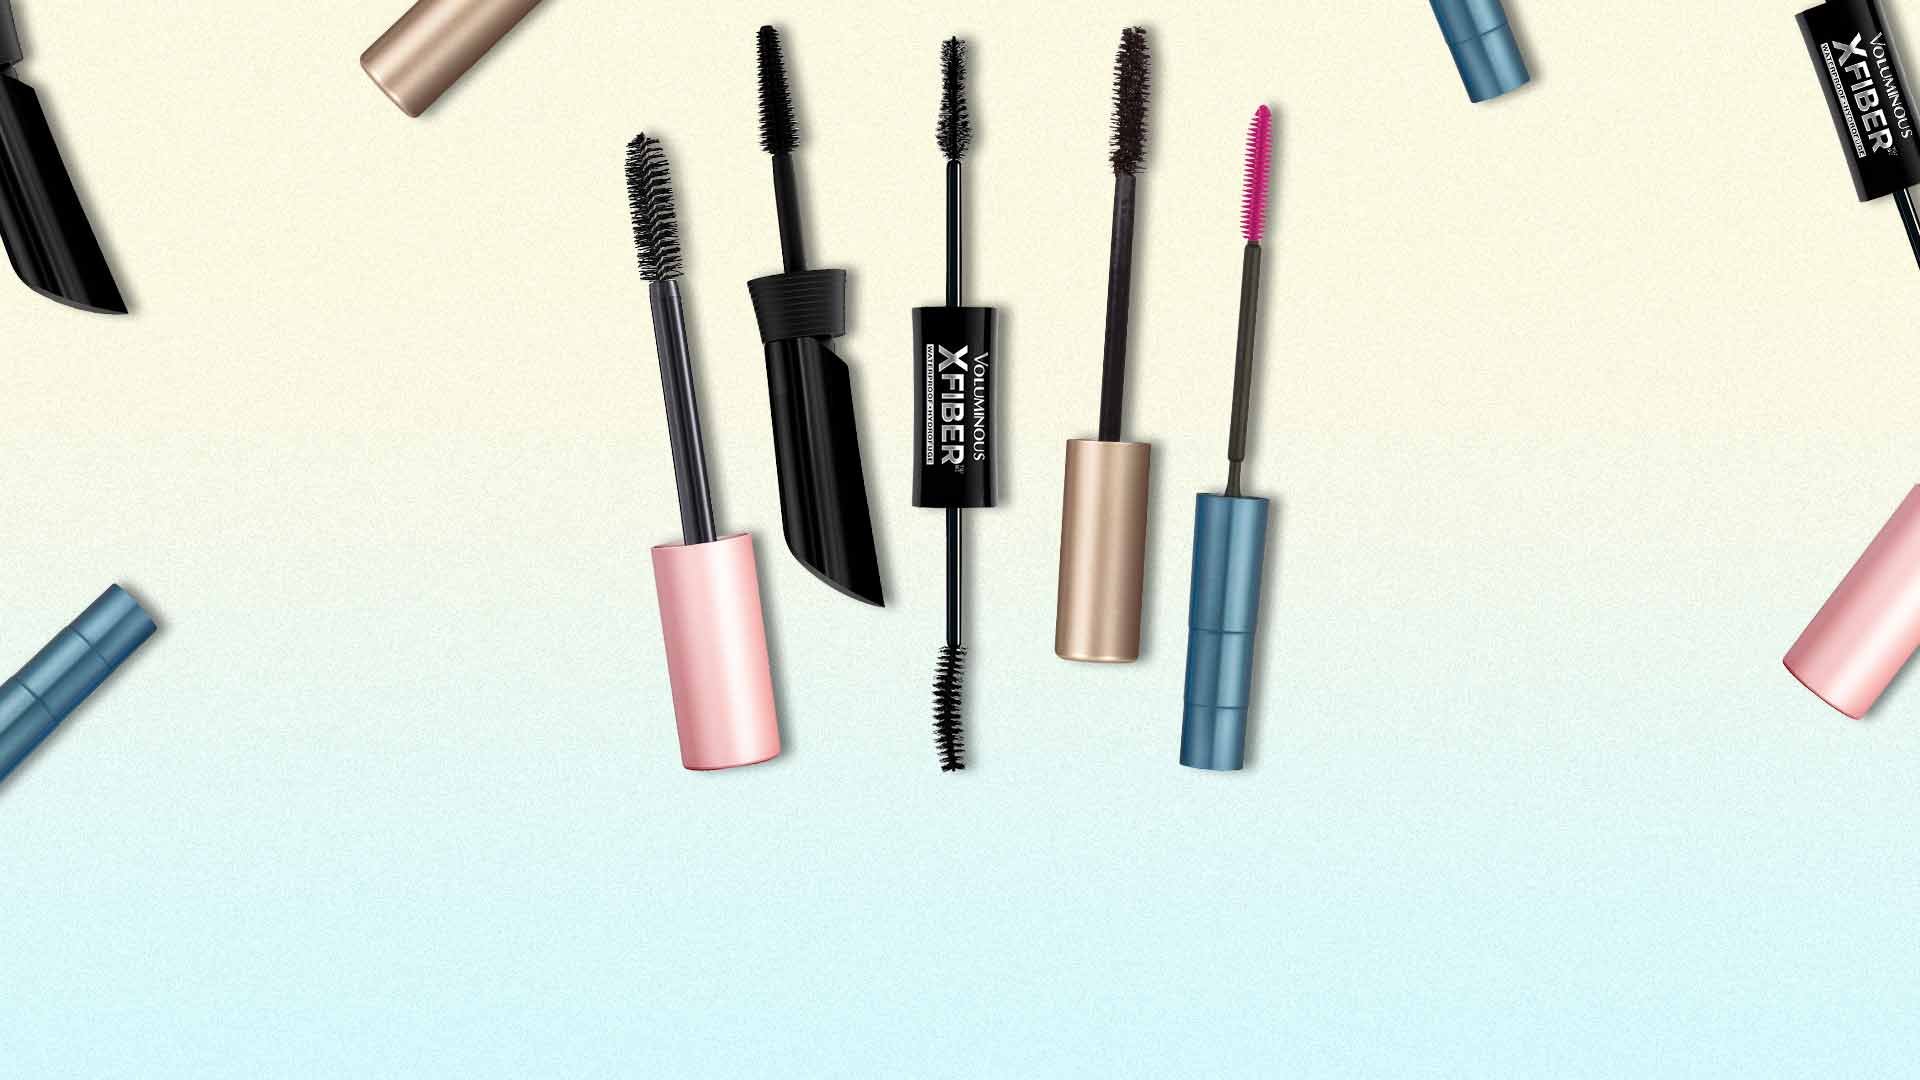 Which Type Of Mascara Brush & Wand Is The Best? - L'Oréal Paris